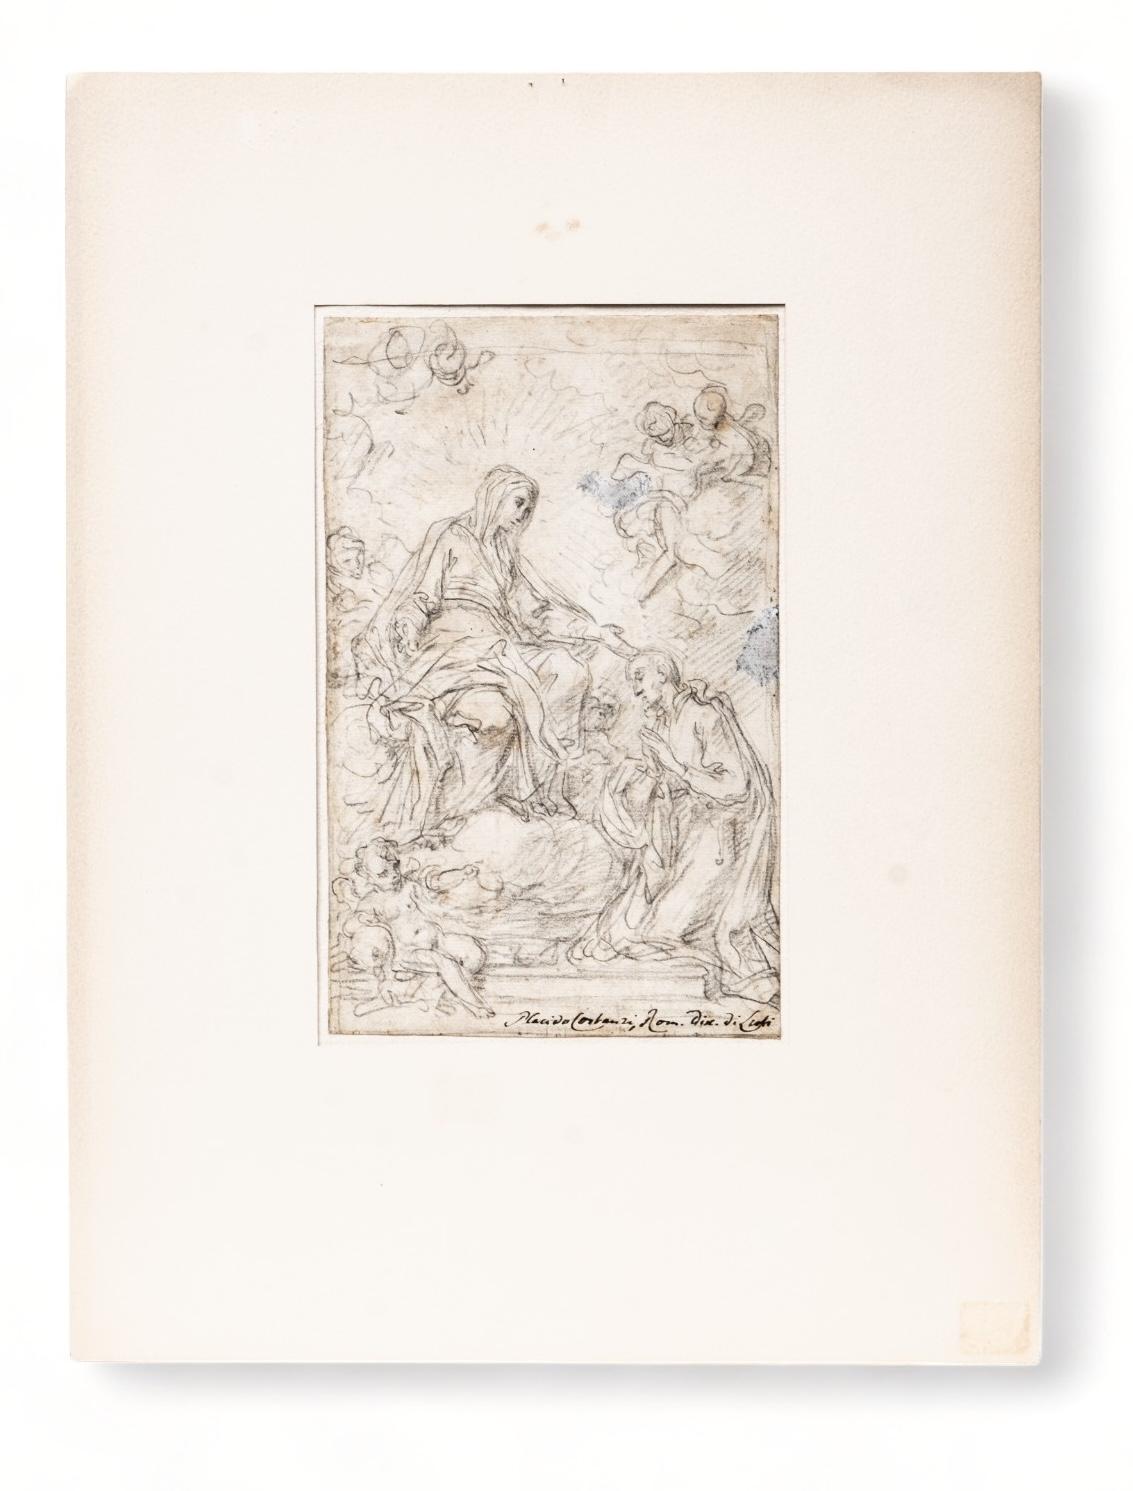 Attributed to Placido COSTANZI (Naples 1702 - Rome 1759) Virgin interceding with a cleric Pencil Drawing. Signed and located at the bottom 